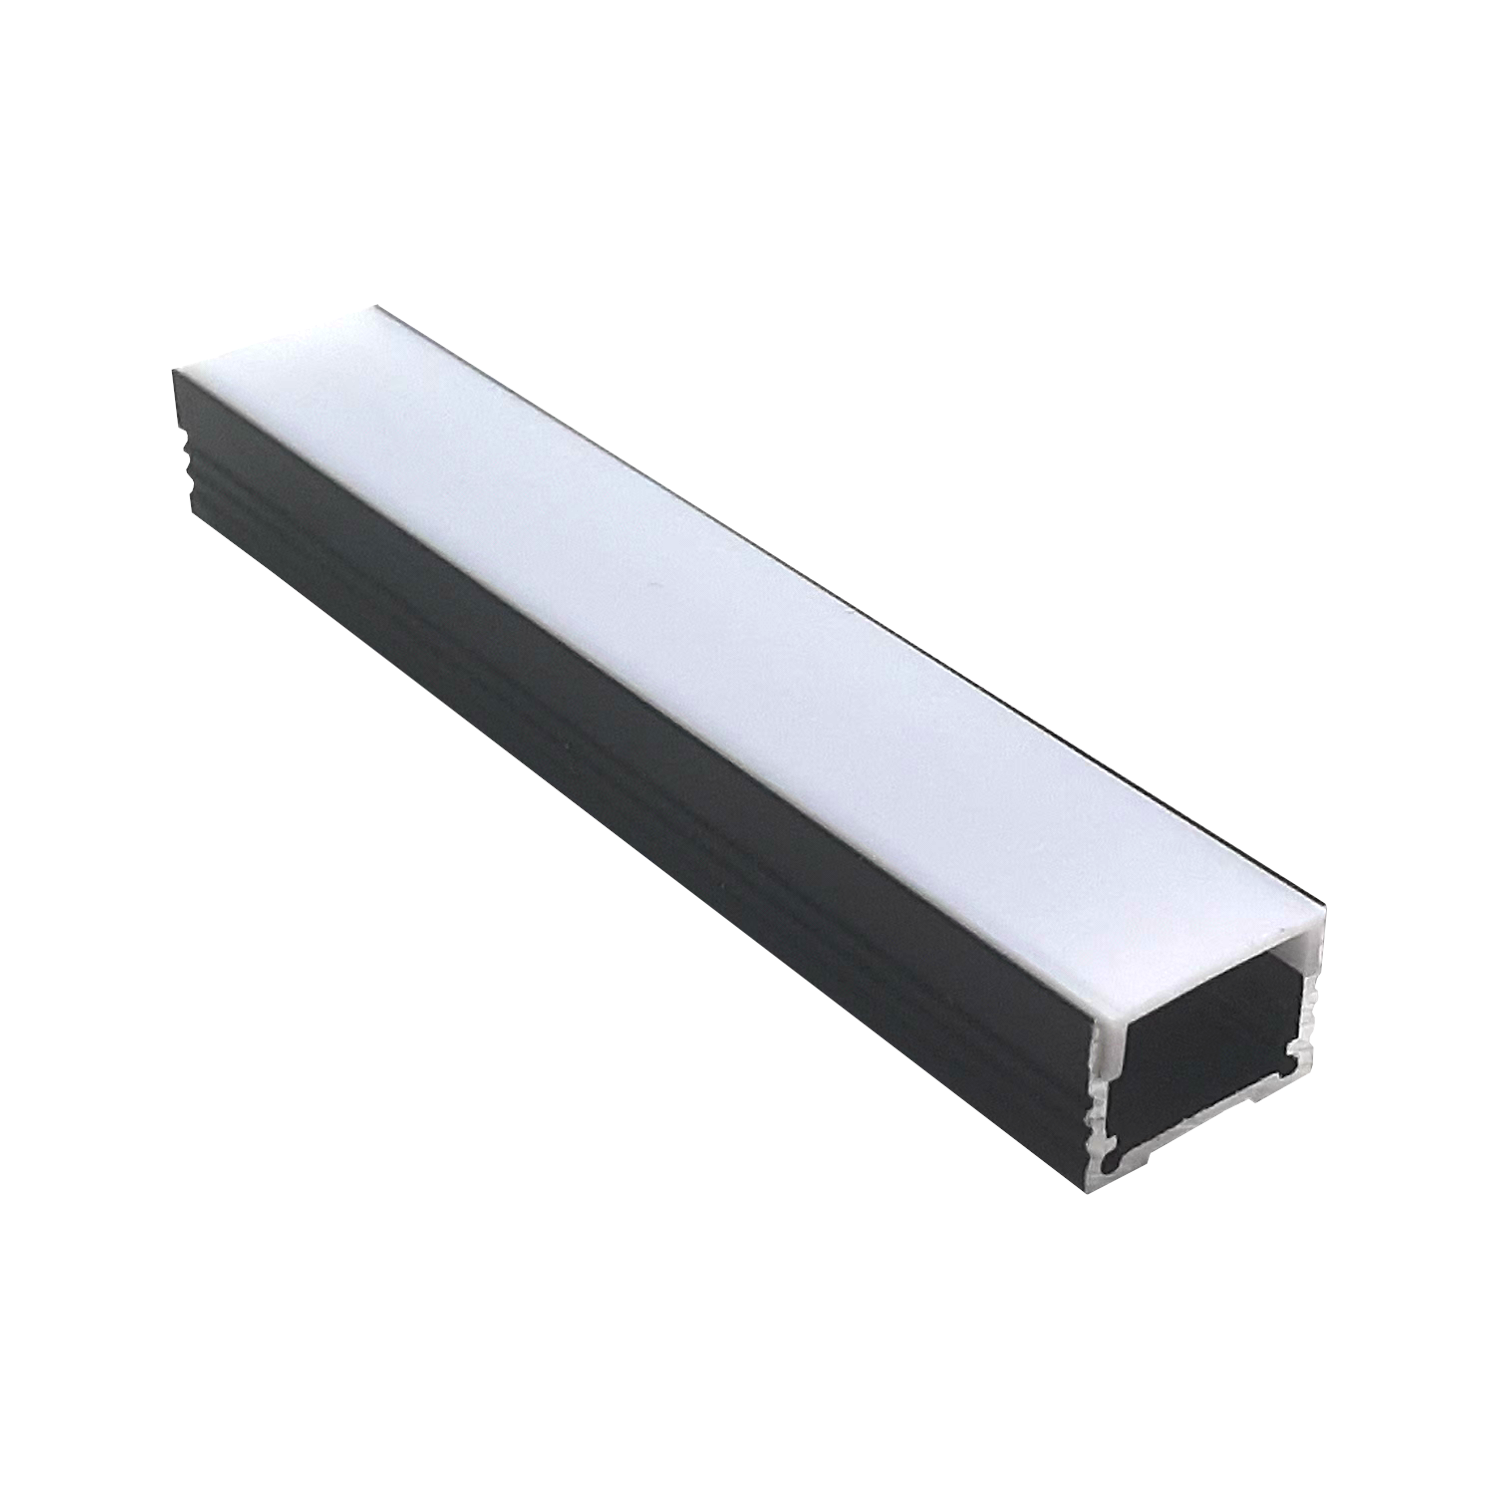 Product image of LXT12 Black Deep Extrusion for Dot Free LED strip